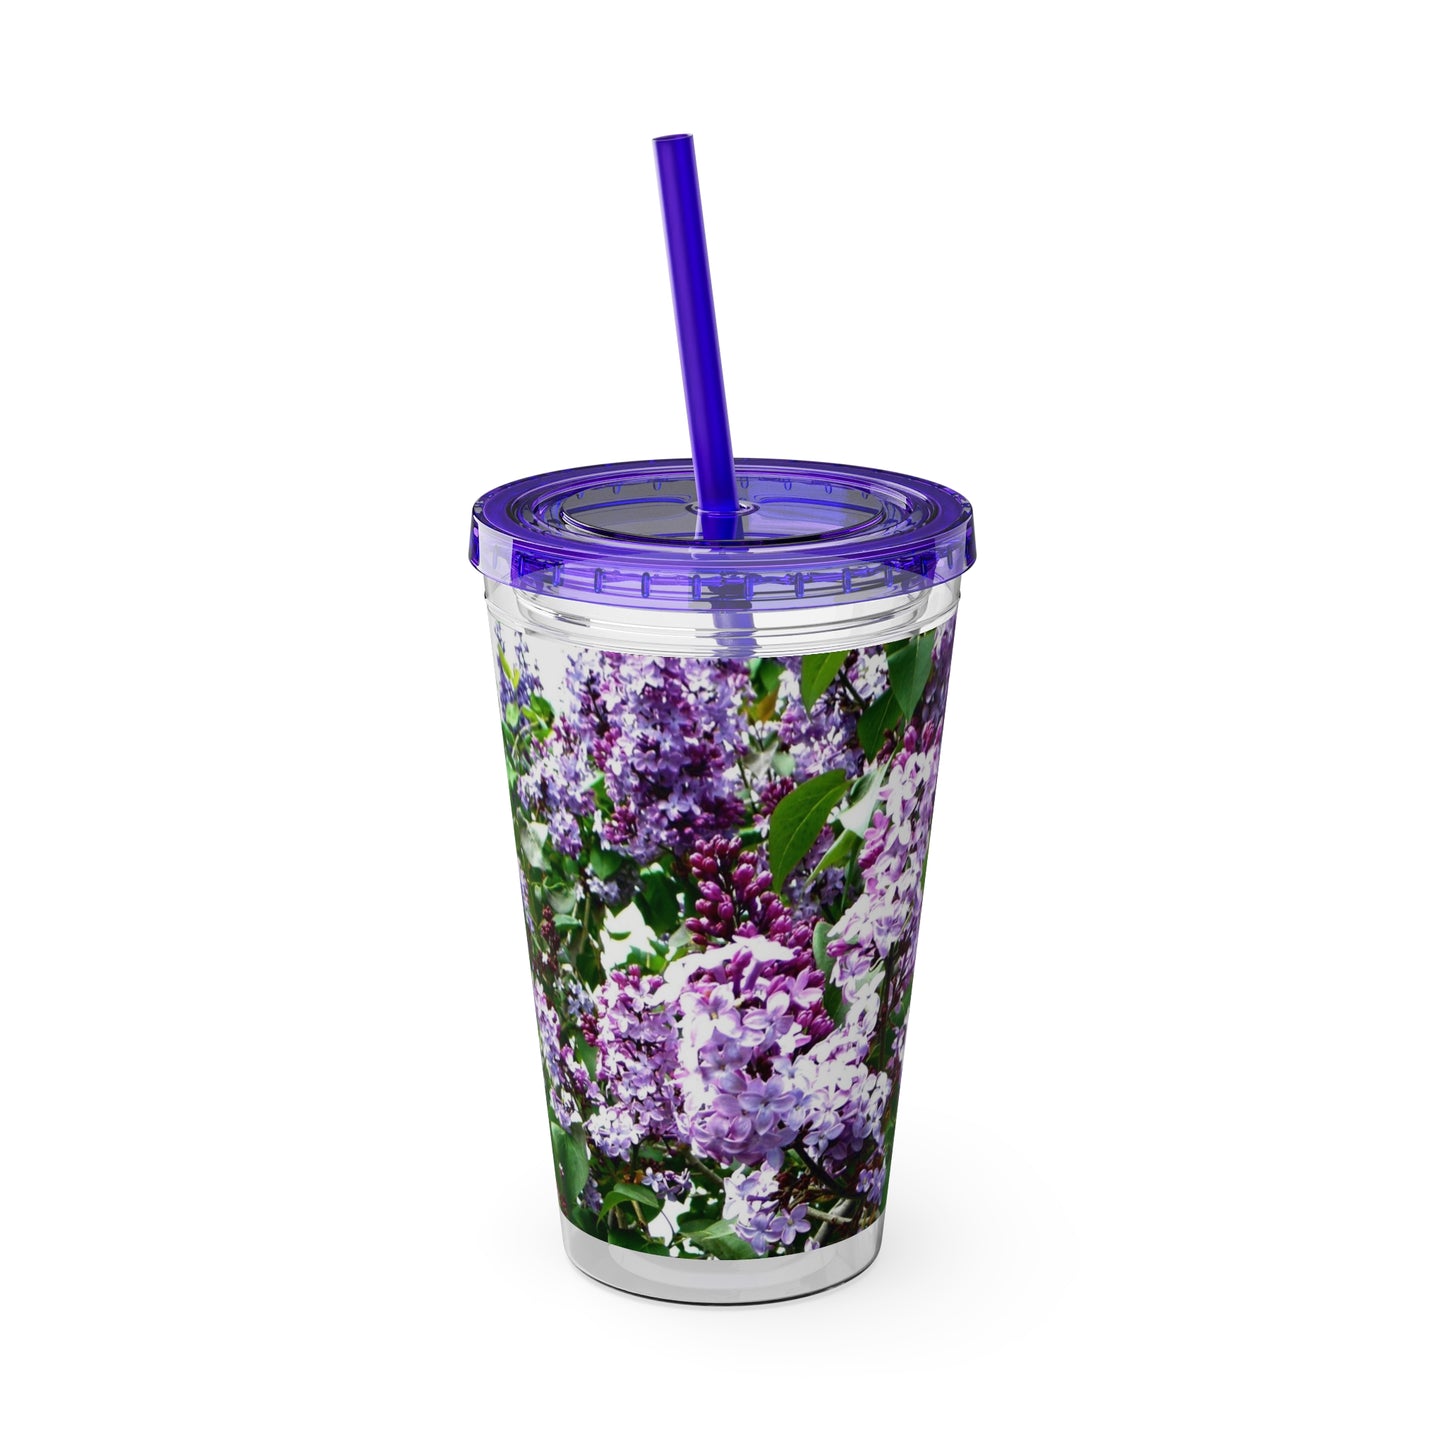 A Printify Purple Lilacs Tumbler with purple lilacs and a blue straw.